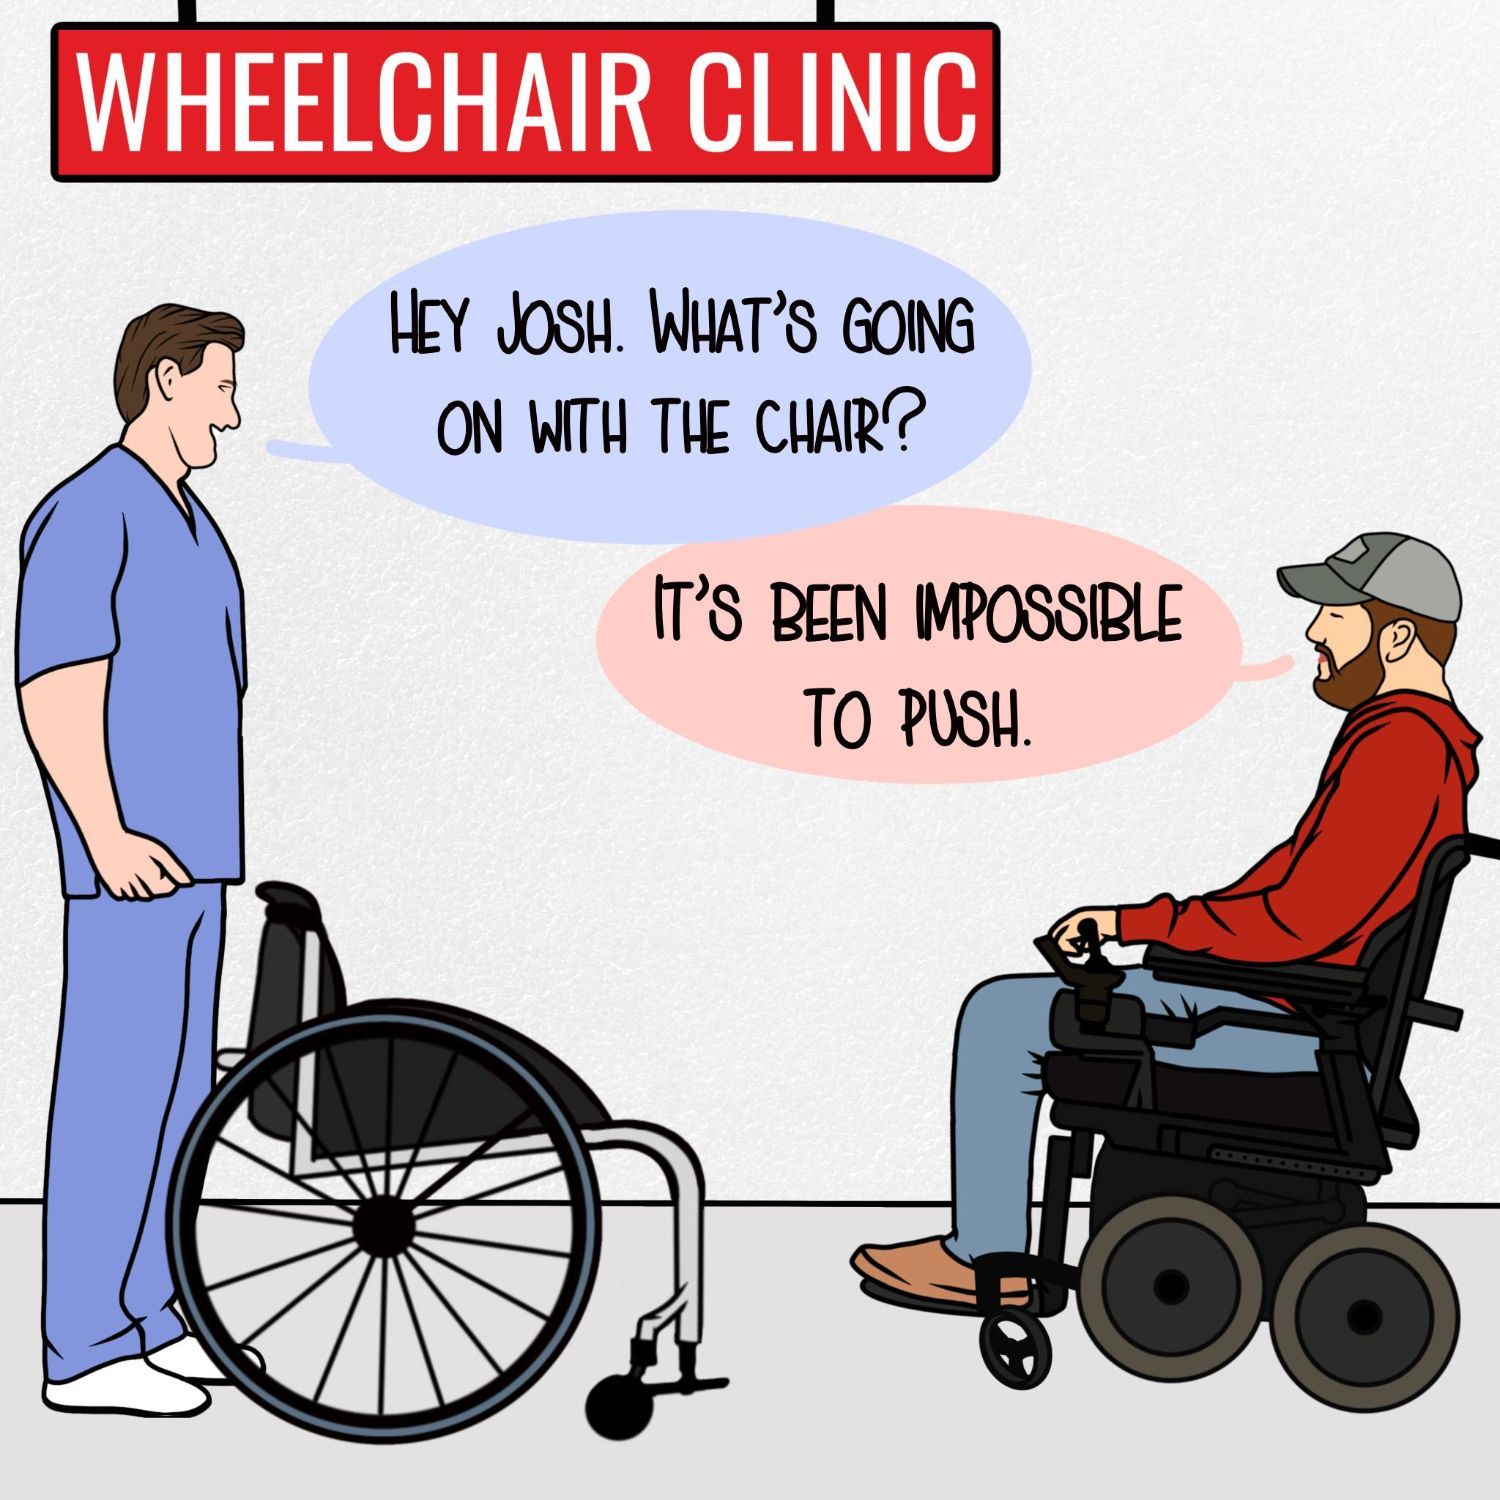 Image prescription: a sign that's his wheelchair clinic hanging over hey therapist in behind a manual chair yes says to the wheelchair user 